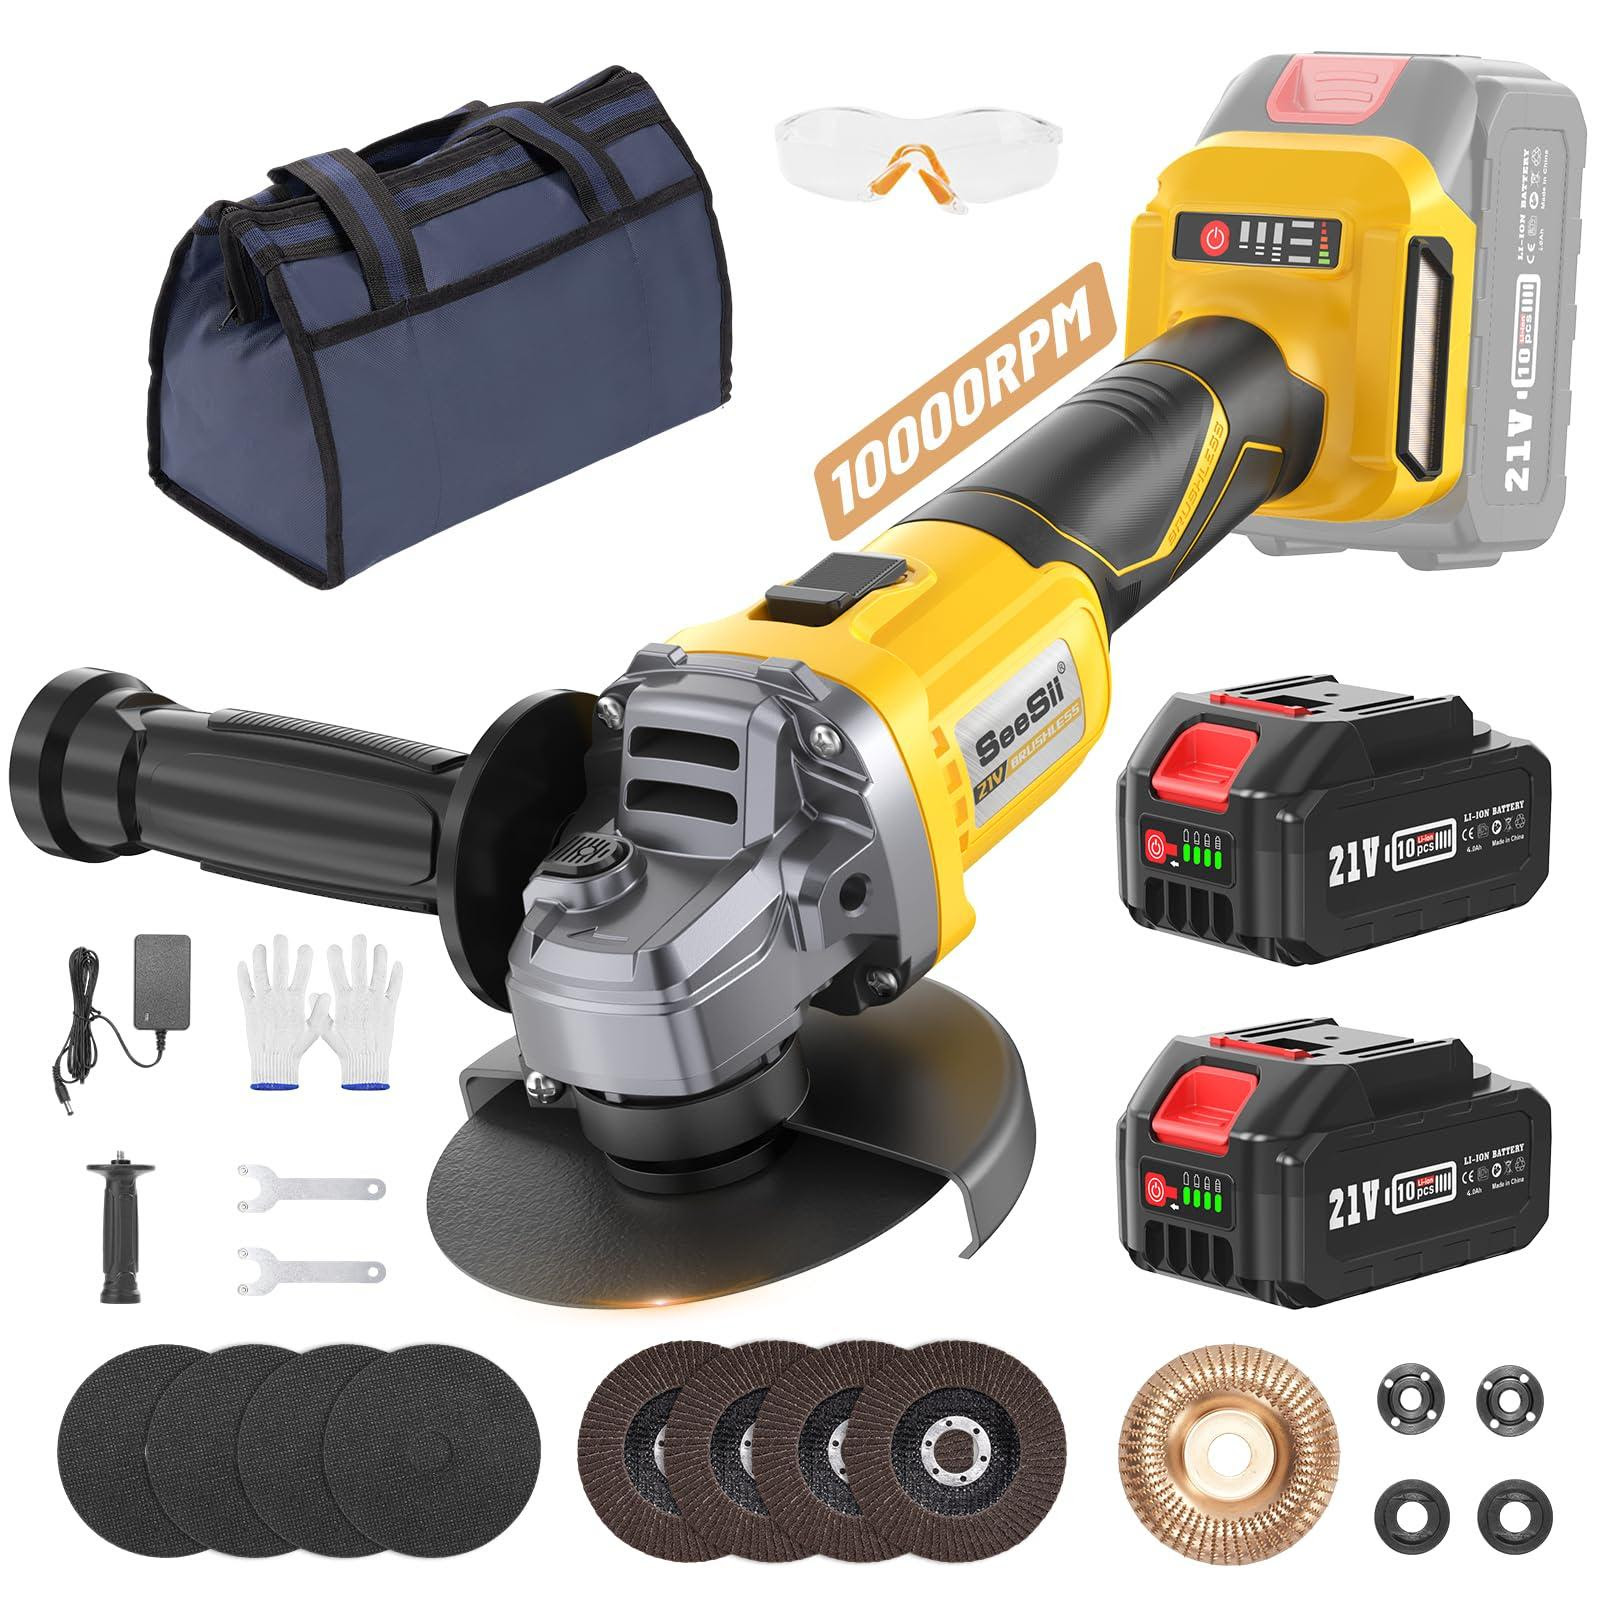 Cordless 10000RPM Angle Grinder Kit with 2x4.0Ah Battery.  400units. EXW Los Angeles $48.00 unit.